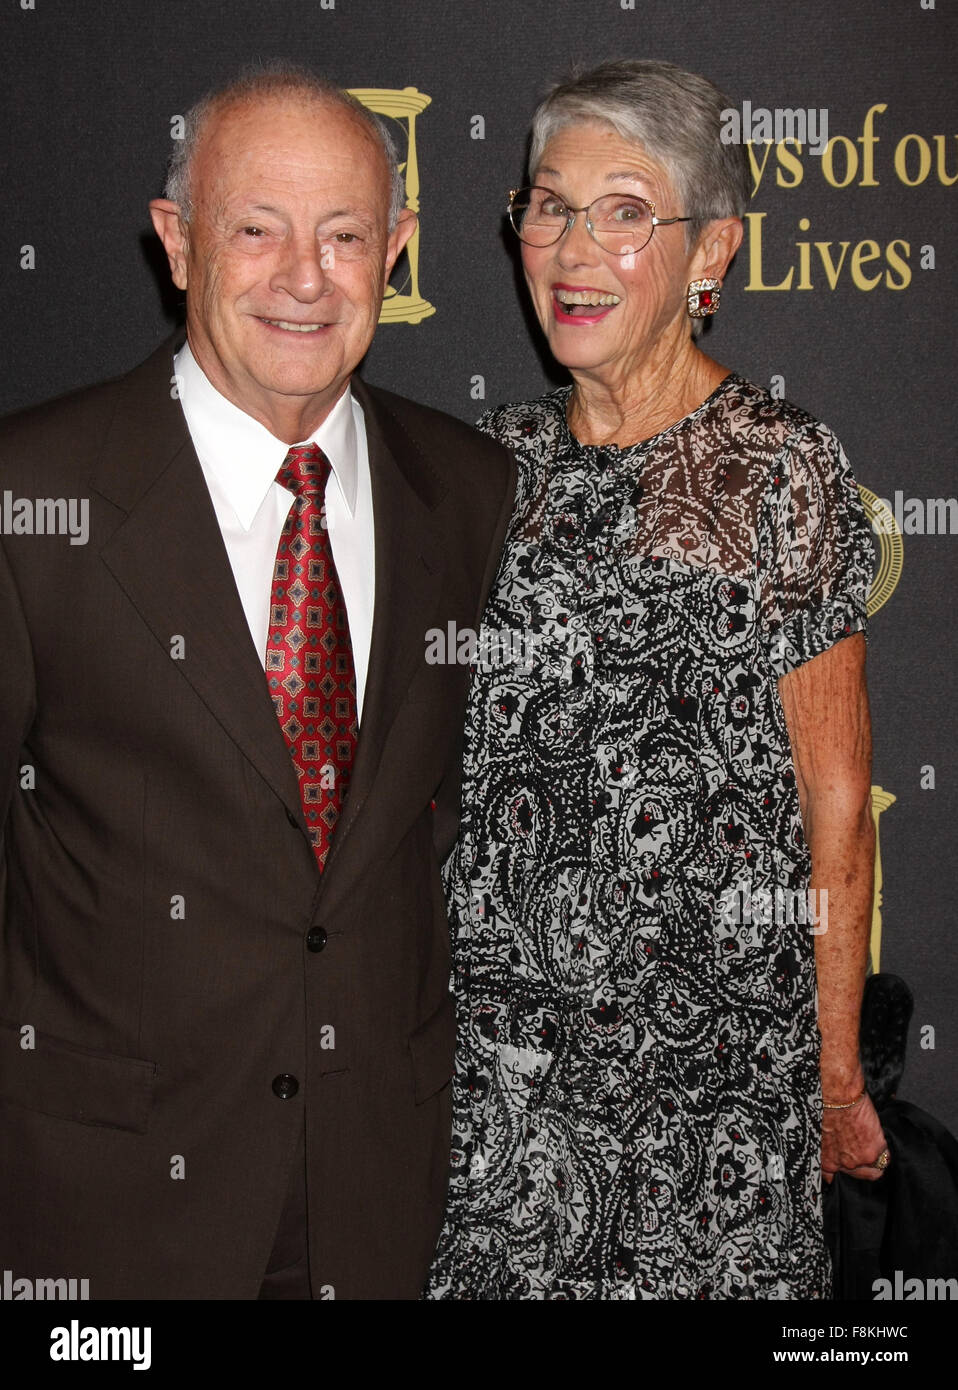 Days of Our Lives 50th Annivsary Celebration held at the Hollywood Palladium - Arrivals  Featuring: Lou Genevrino, Elinor Donahue Where: Los Angeles, California, United States When: 08 Nov 2015 Stock Photo